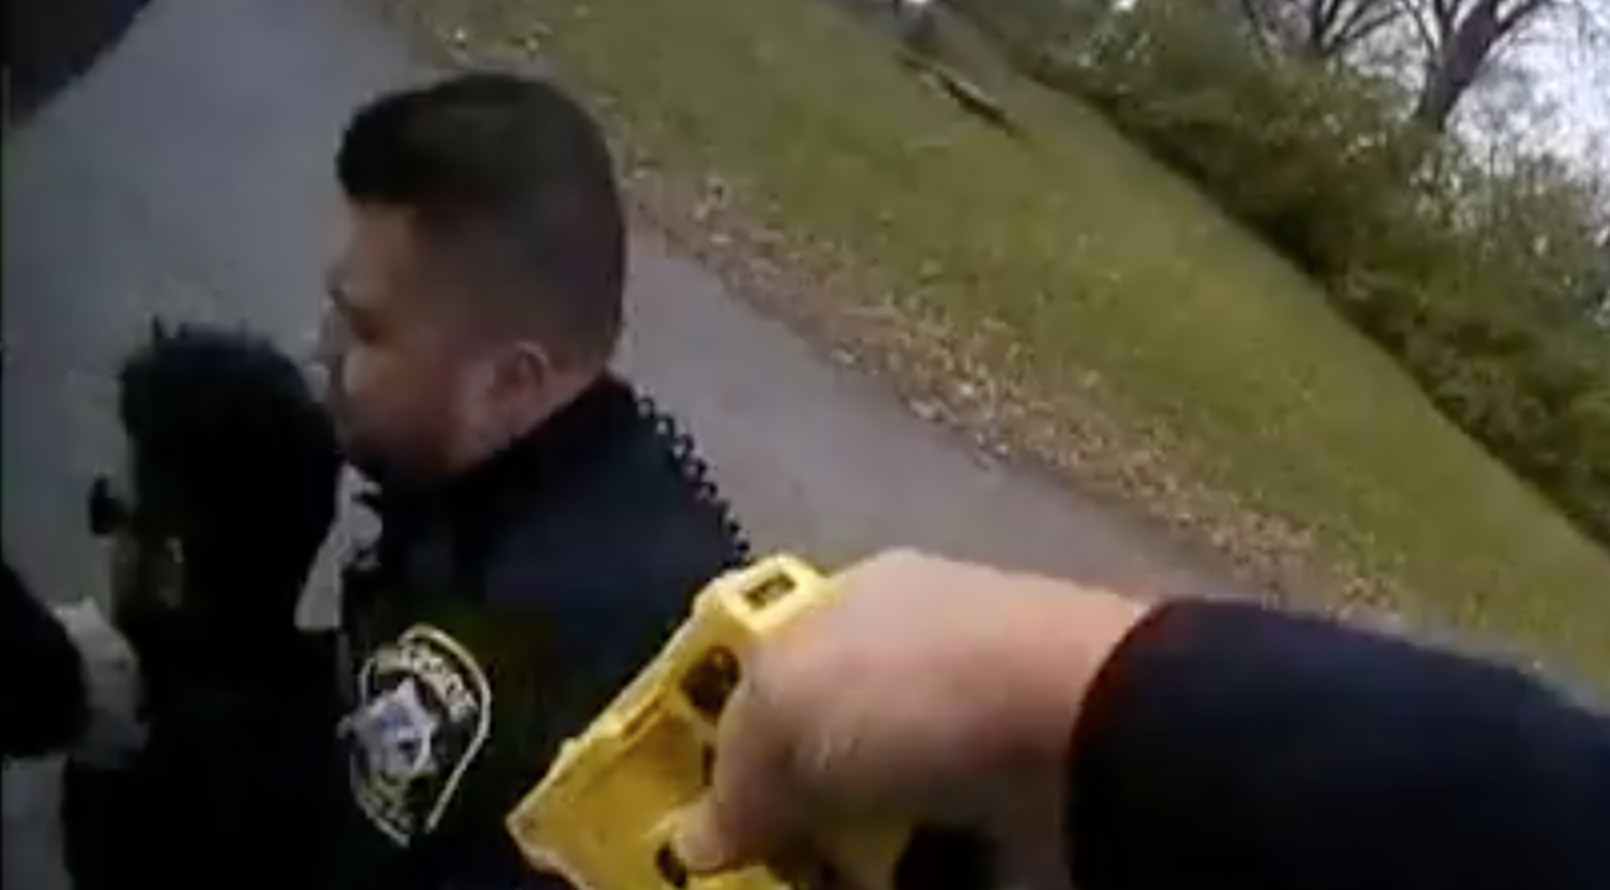 Body cam footage of officer hitting other officer with a TASER